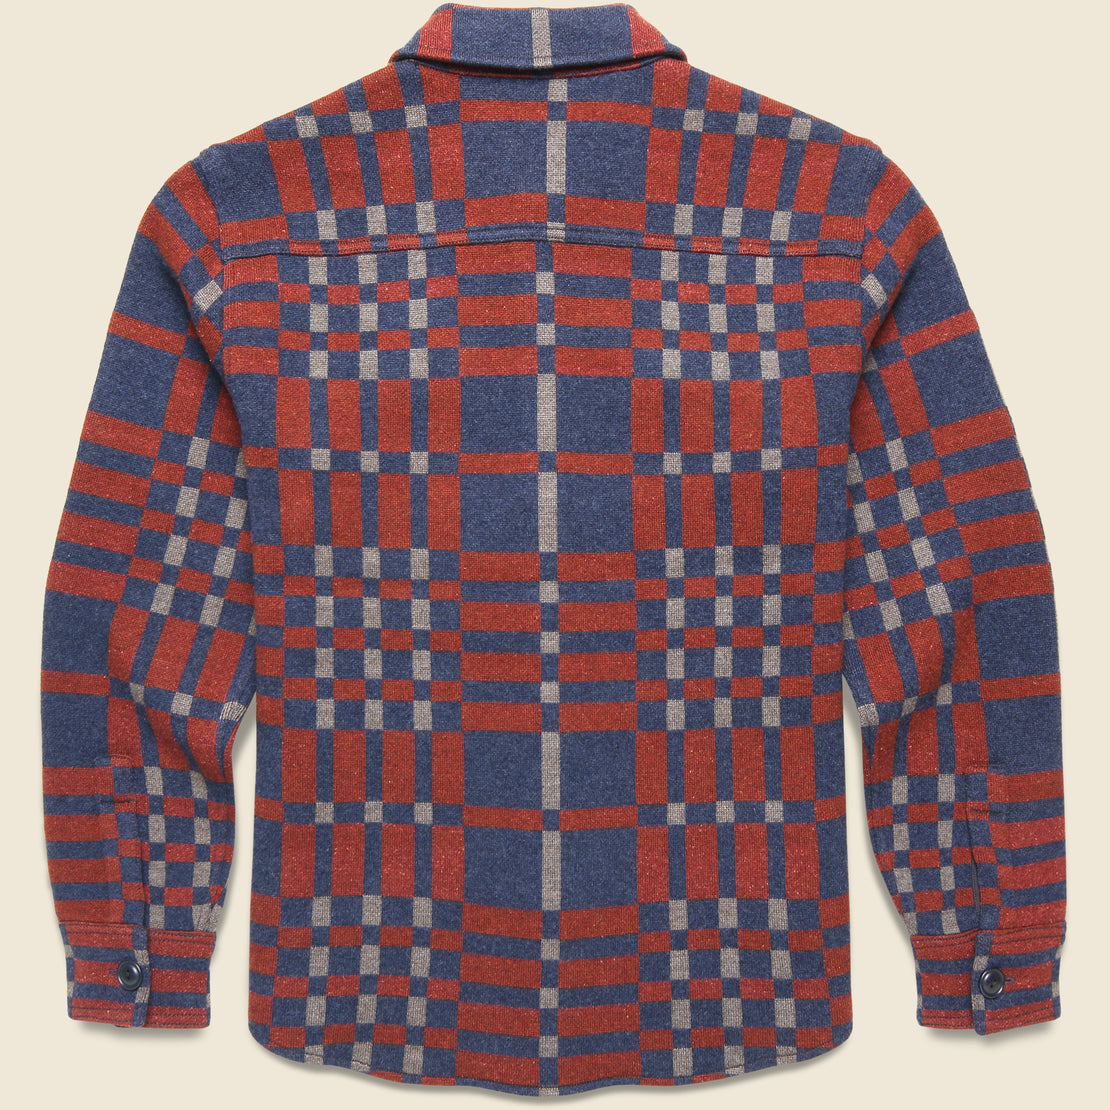 Matlock Sweater Workshirt - Red/Brown/Multi - RRL - STAG Provisions - Tops - Sweater